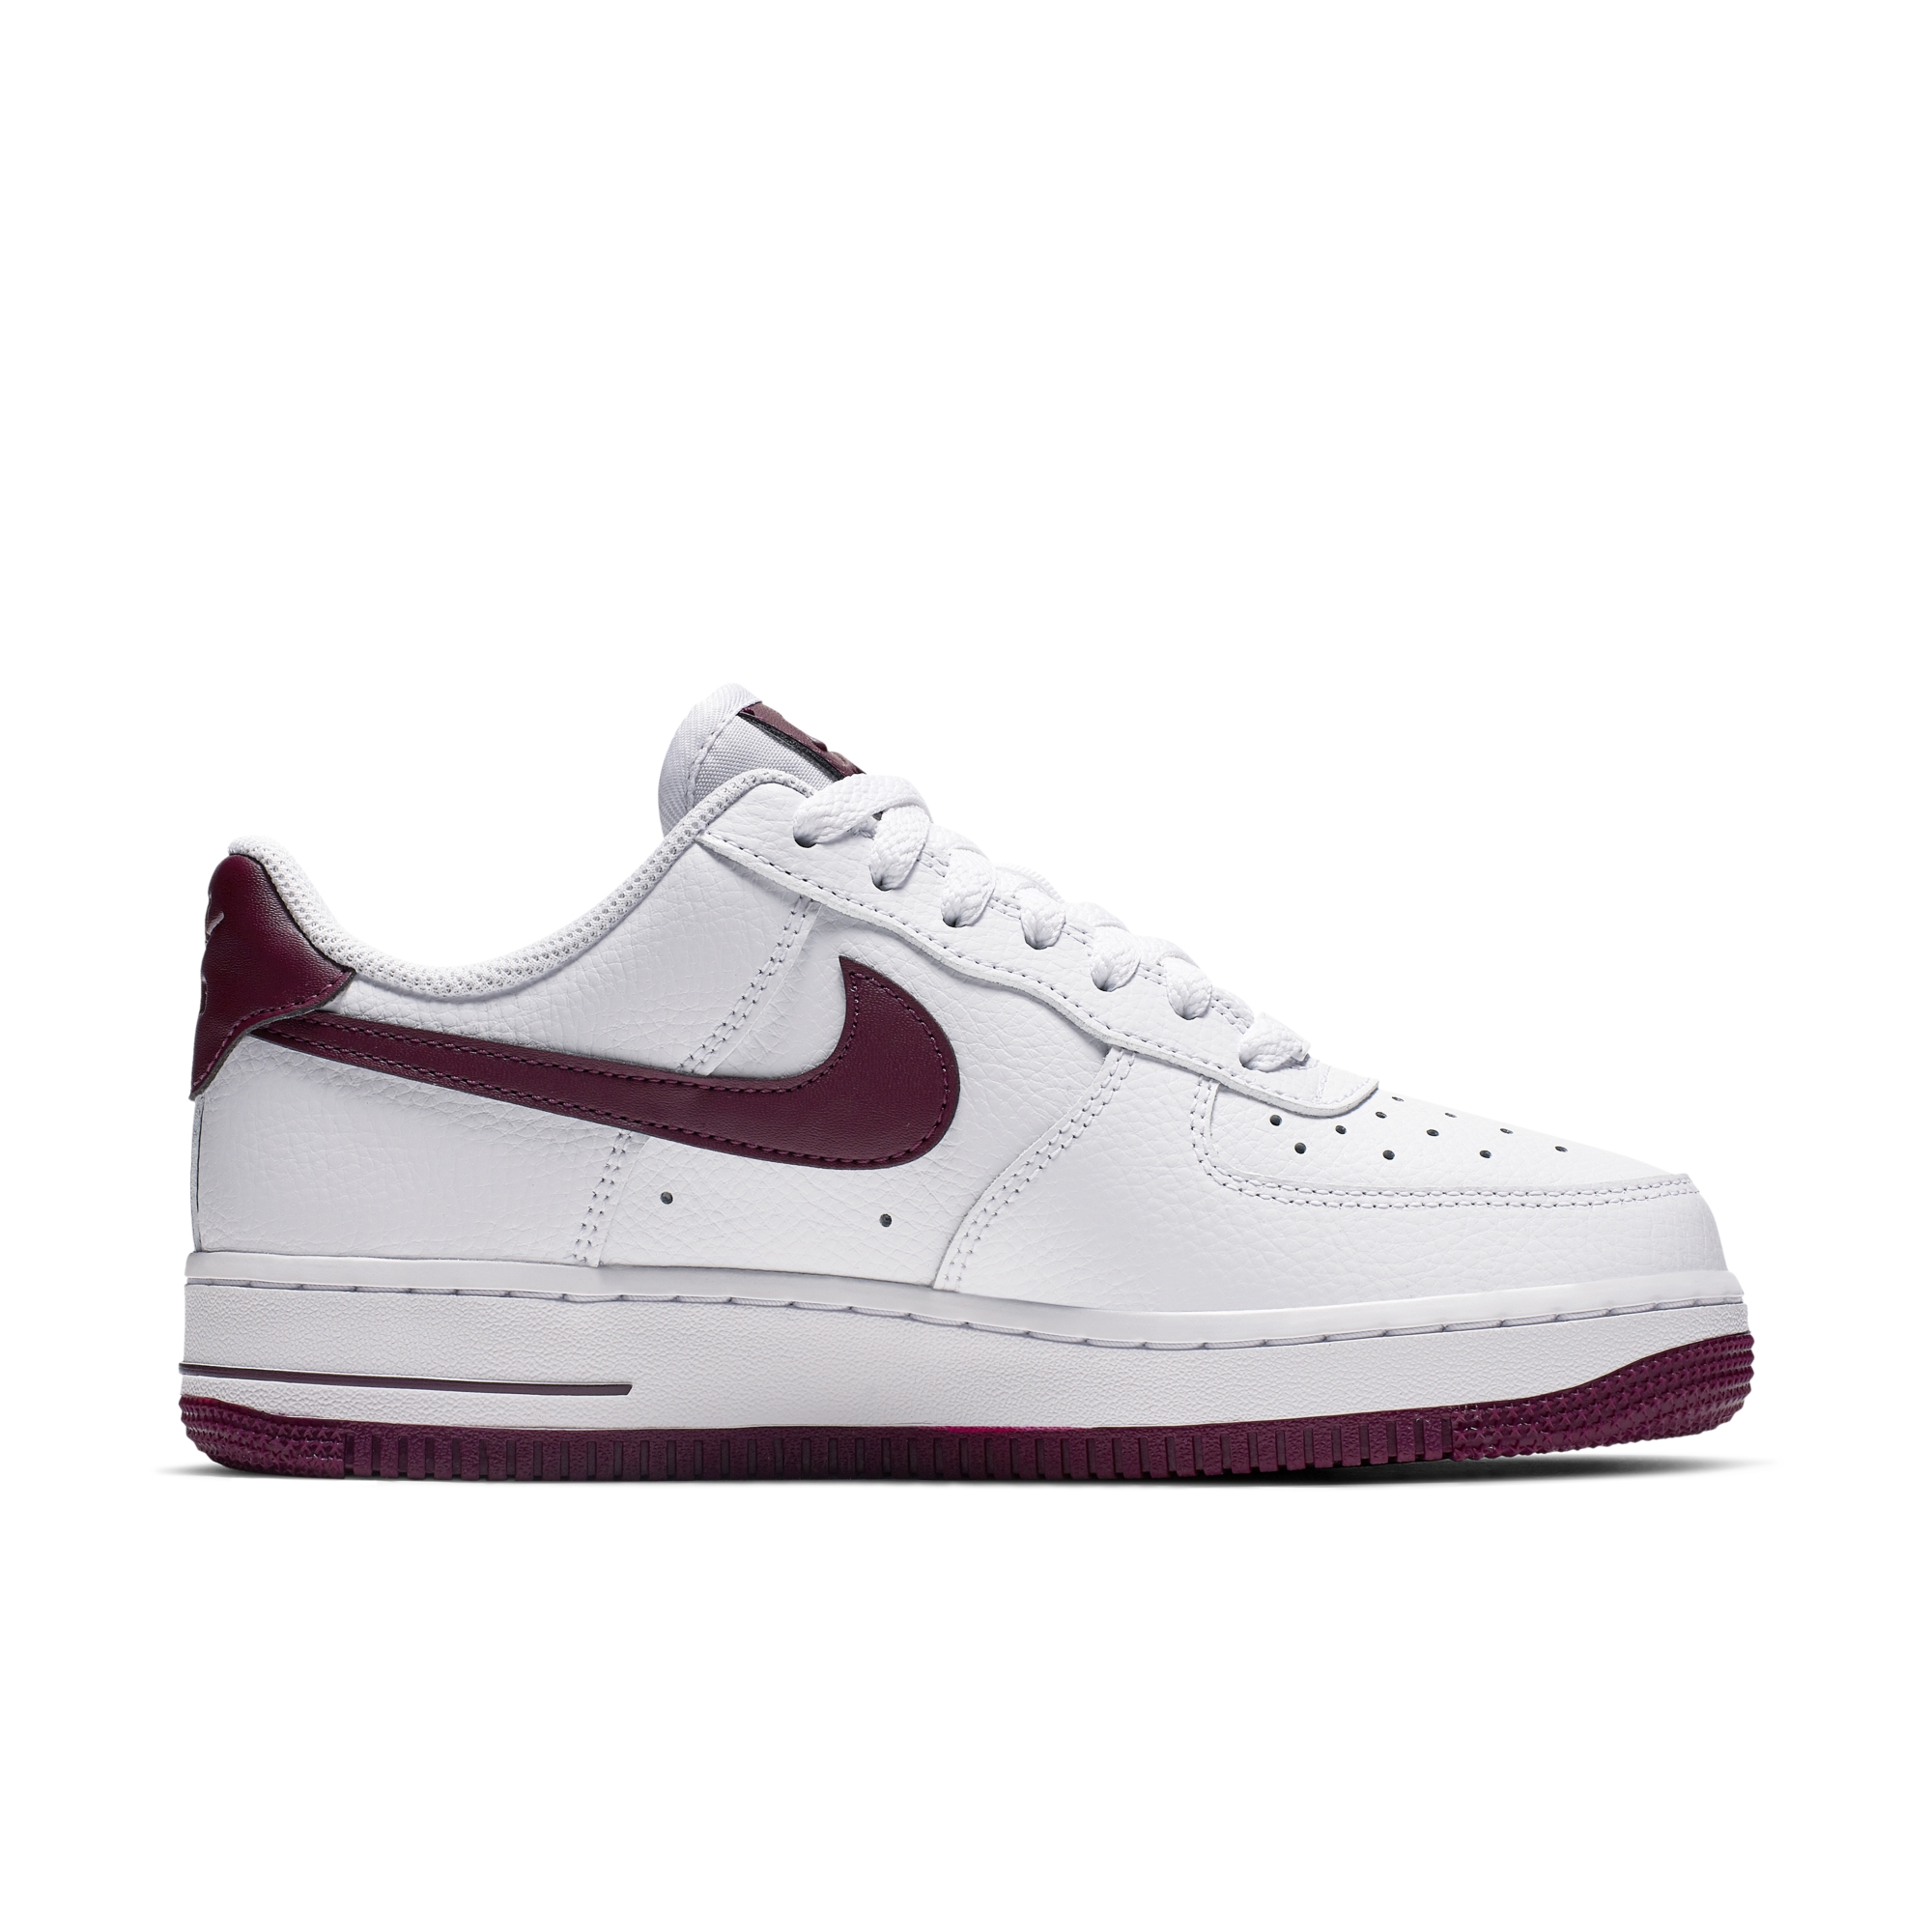 Undulate Galaxy cliff Nike Air Force 1 Low Patent White Bordeaux | Nike | Release Dates, Sneaker  Calendar, Prices & Collaborations